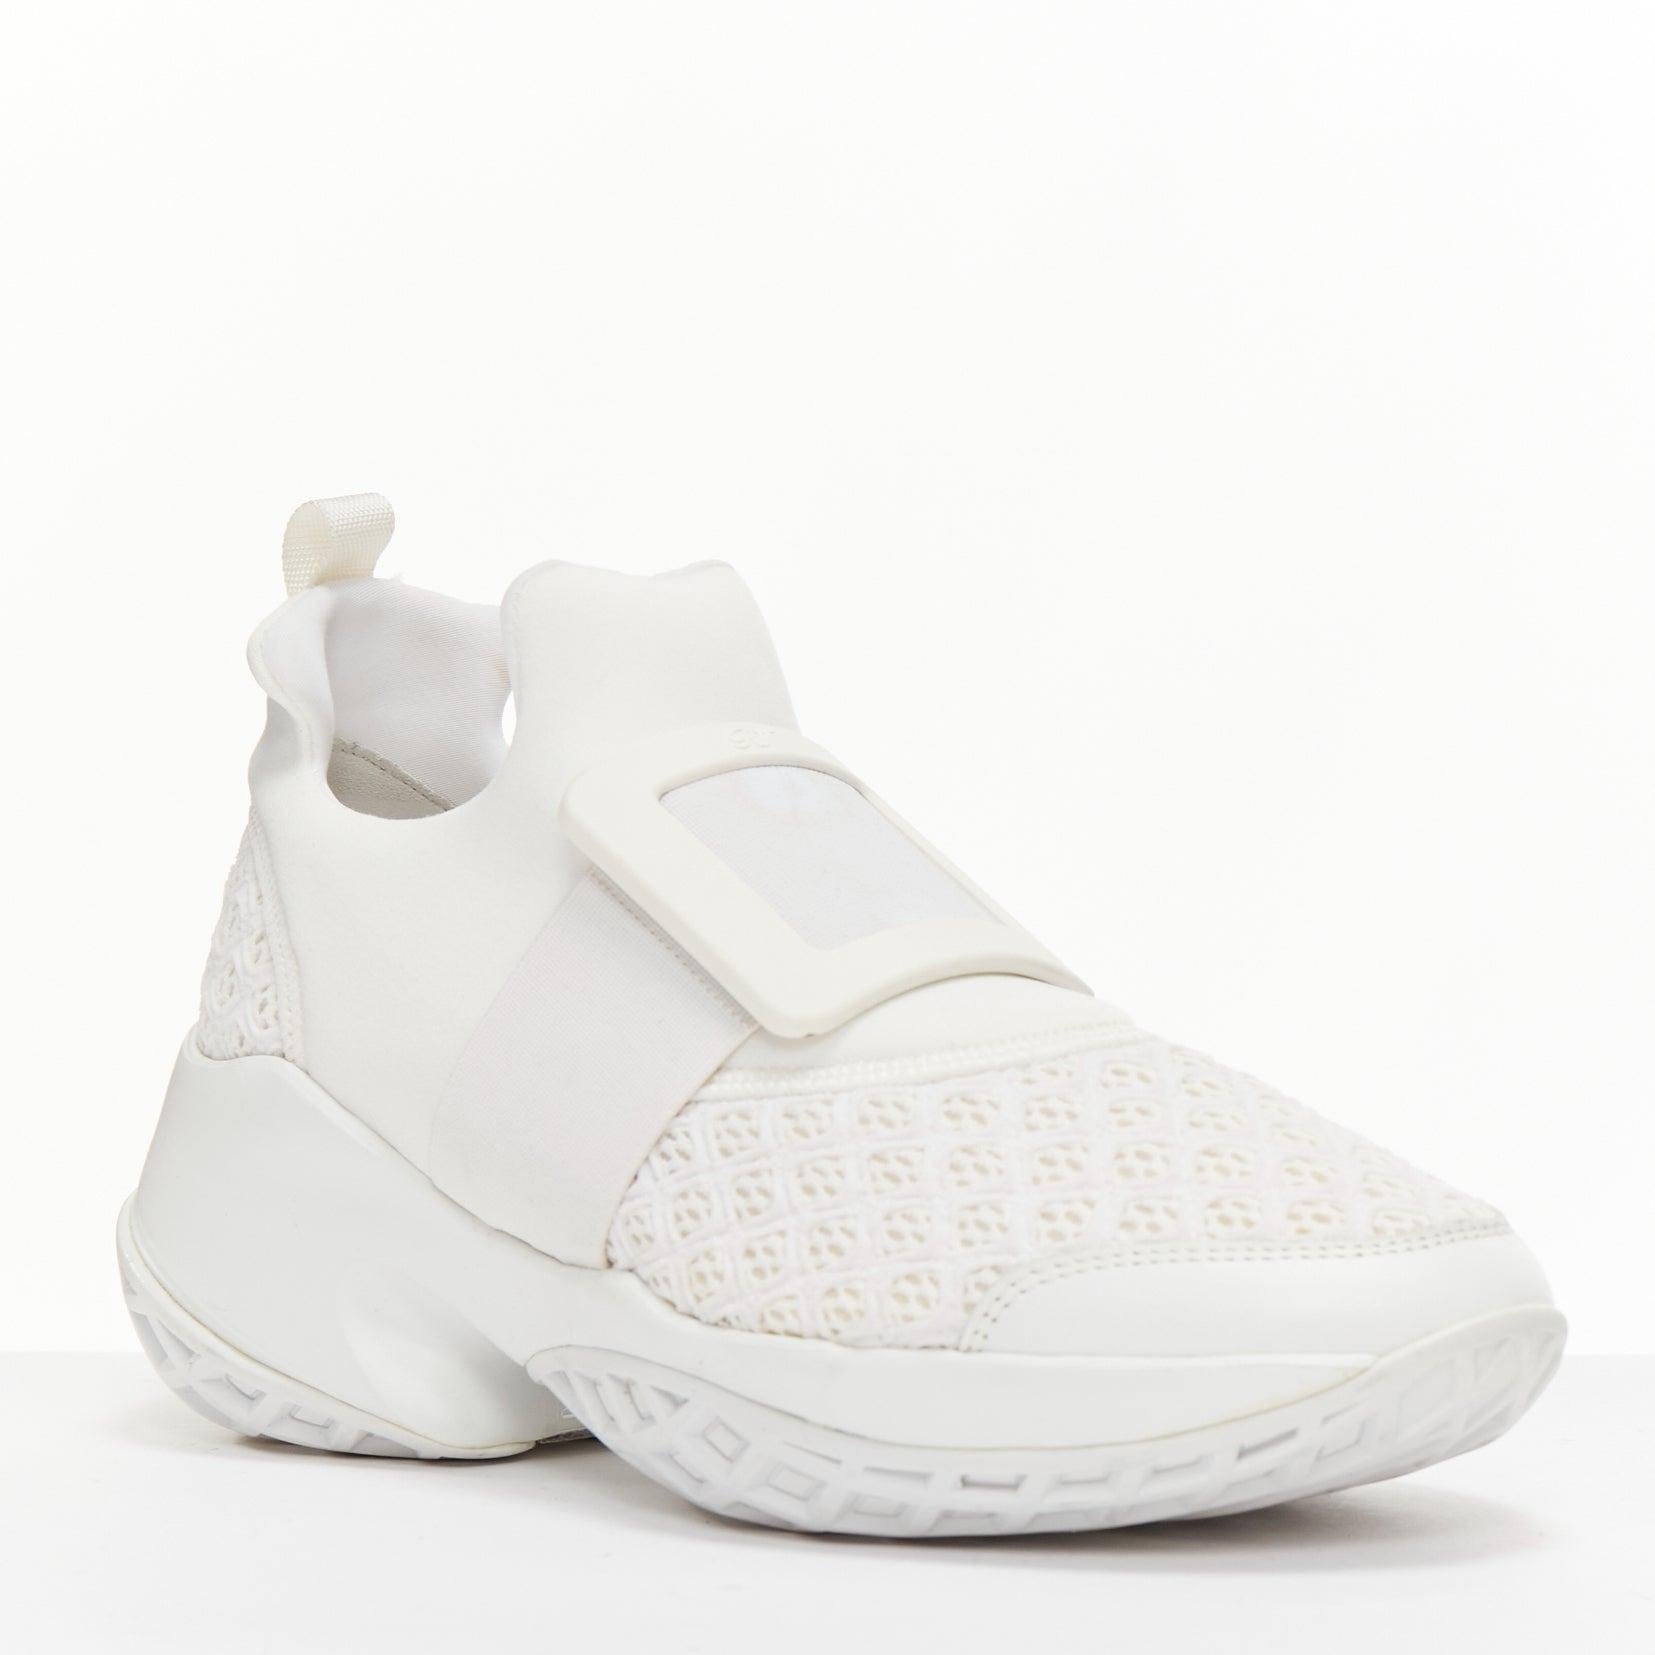 ROGER VIVIER Viv Run white RV rubber buckle mesh front chunky sneakers EU39
Reference: AAWC/A01166
Brand: Roger Vivier
Model: Viv Run
Material: Mesh, Rubber
Color: White
Pattern: Lace
Closure: Slip On
Lining: White Leather
Extra Details: When